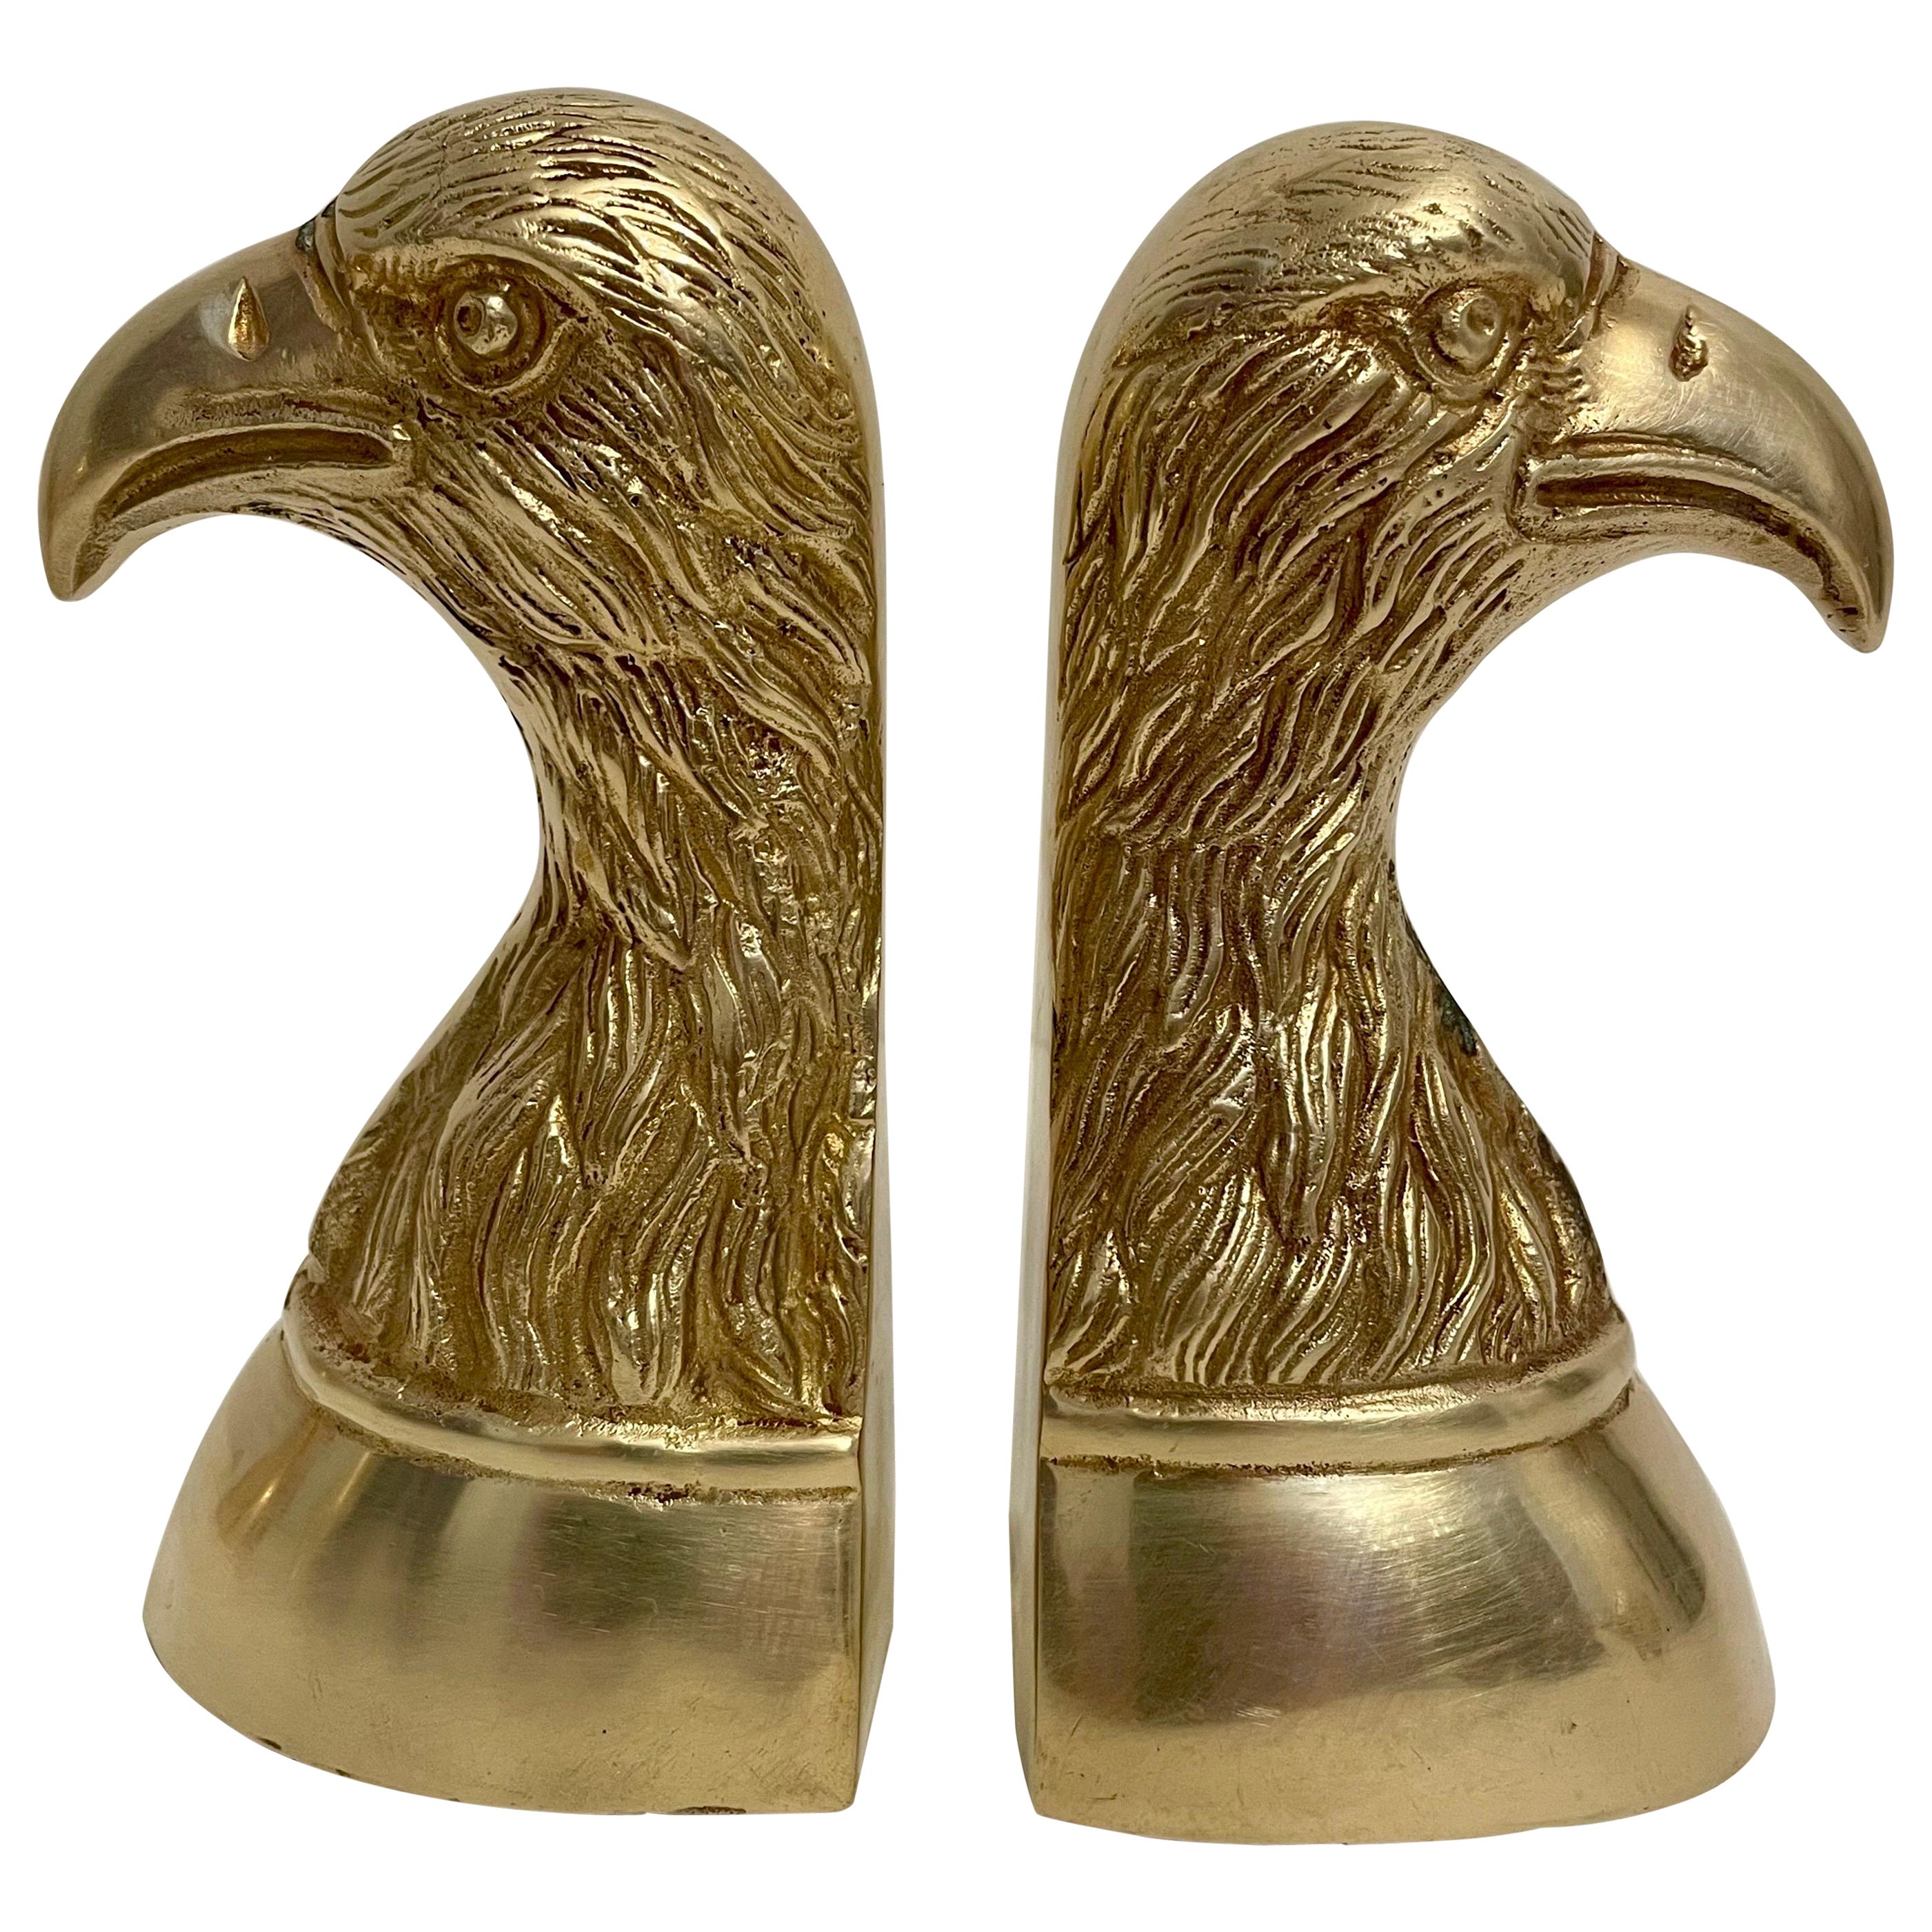 Details about   Brass Eagle Decoration size 3-1/4" wide for Clocks and Boxes 5 PIECES 